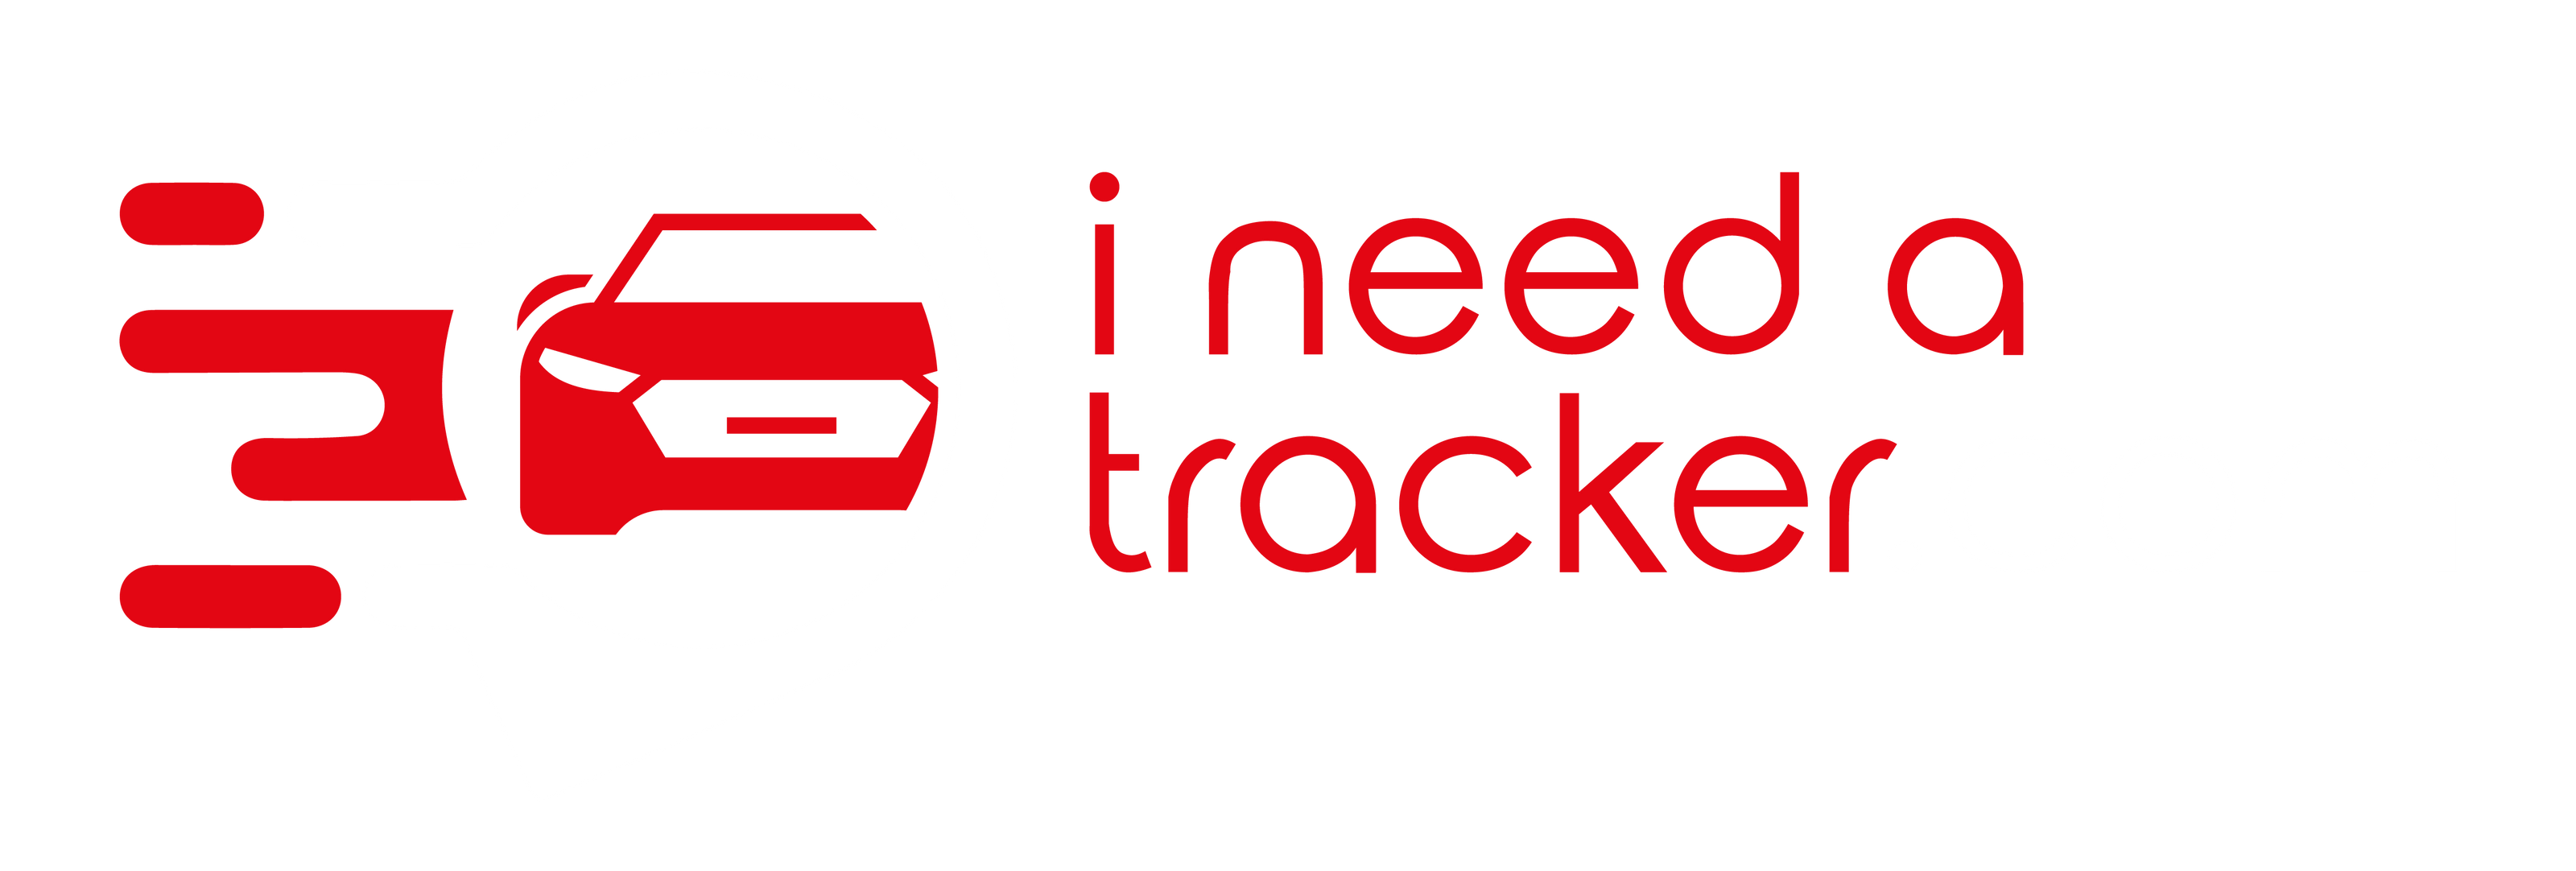 i need a tracker logo white red transparent